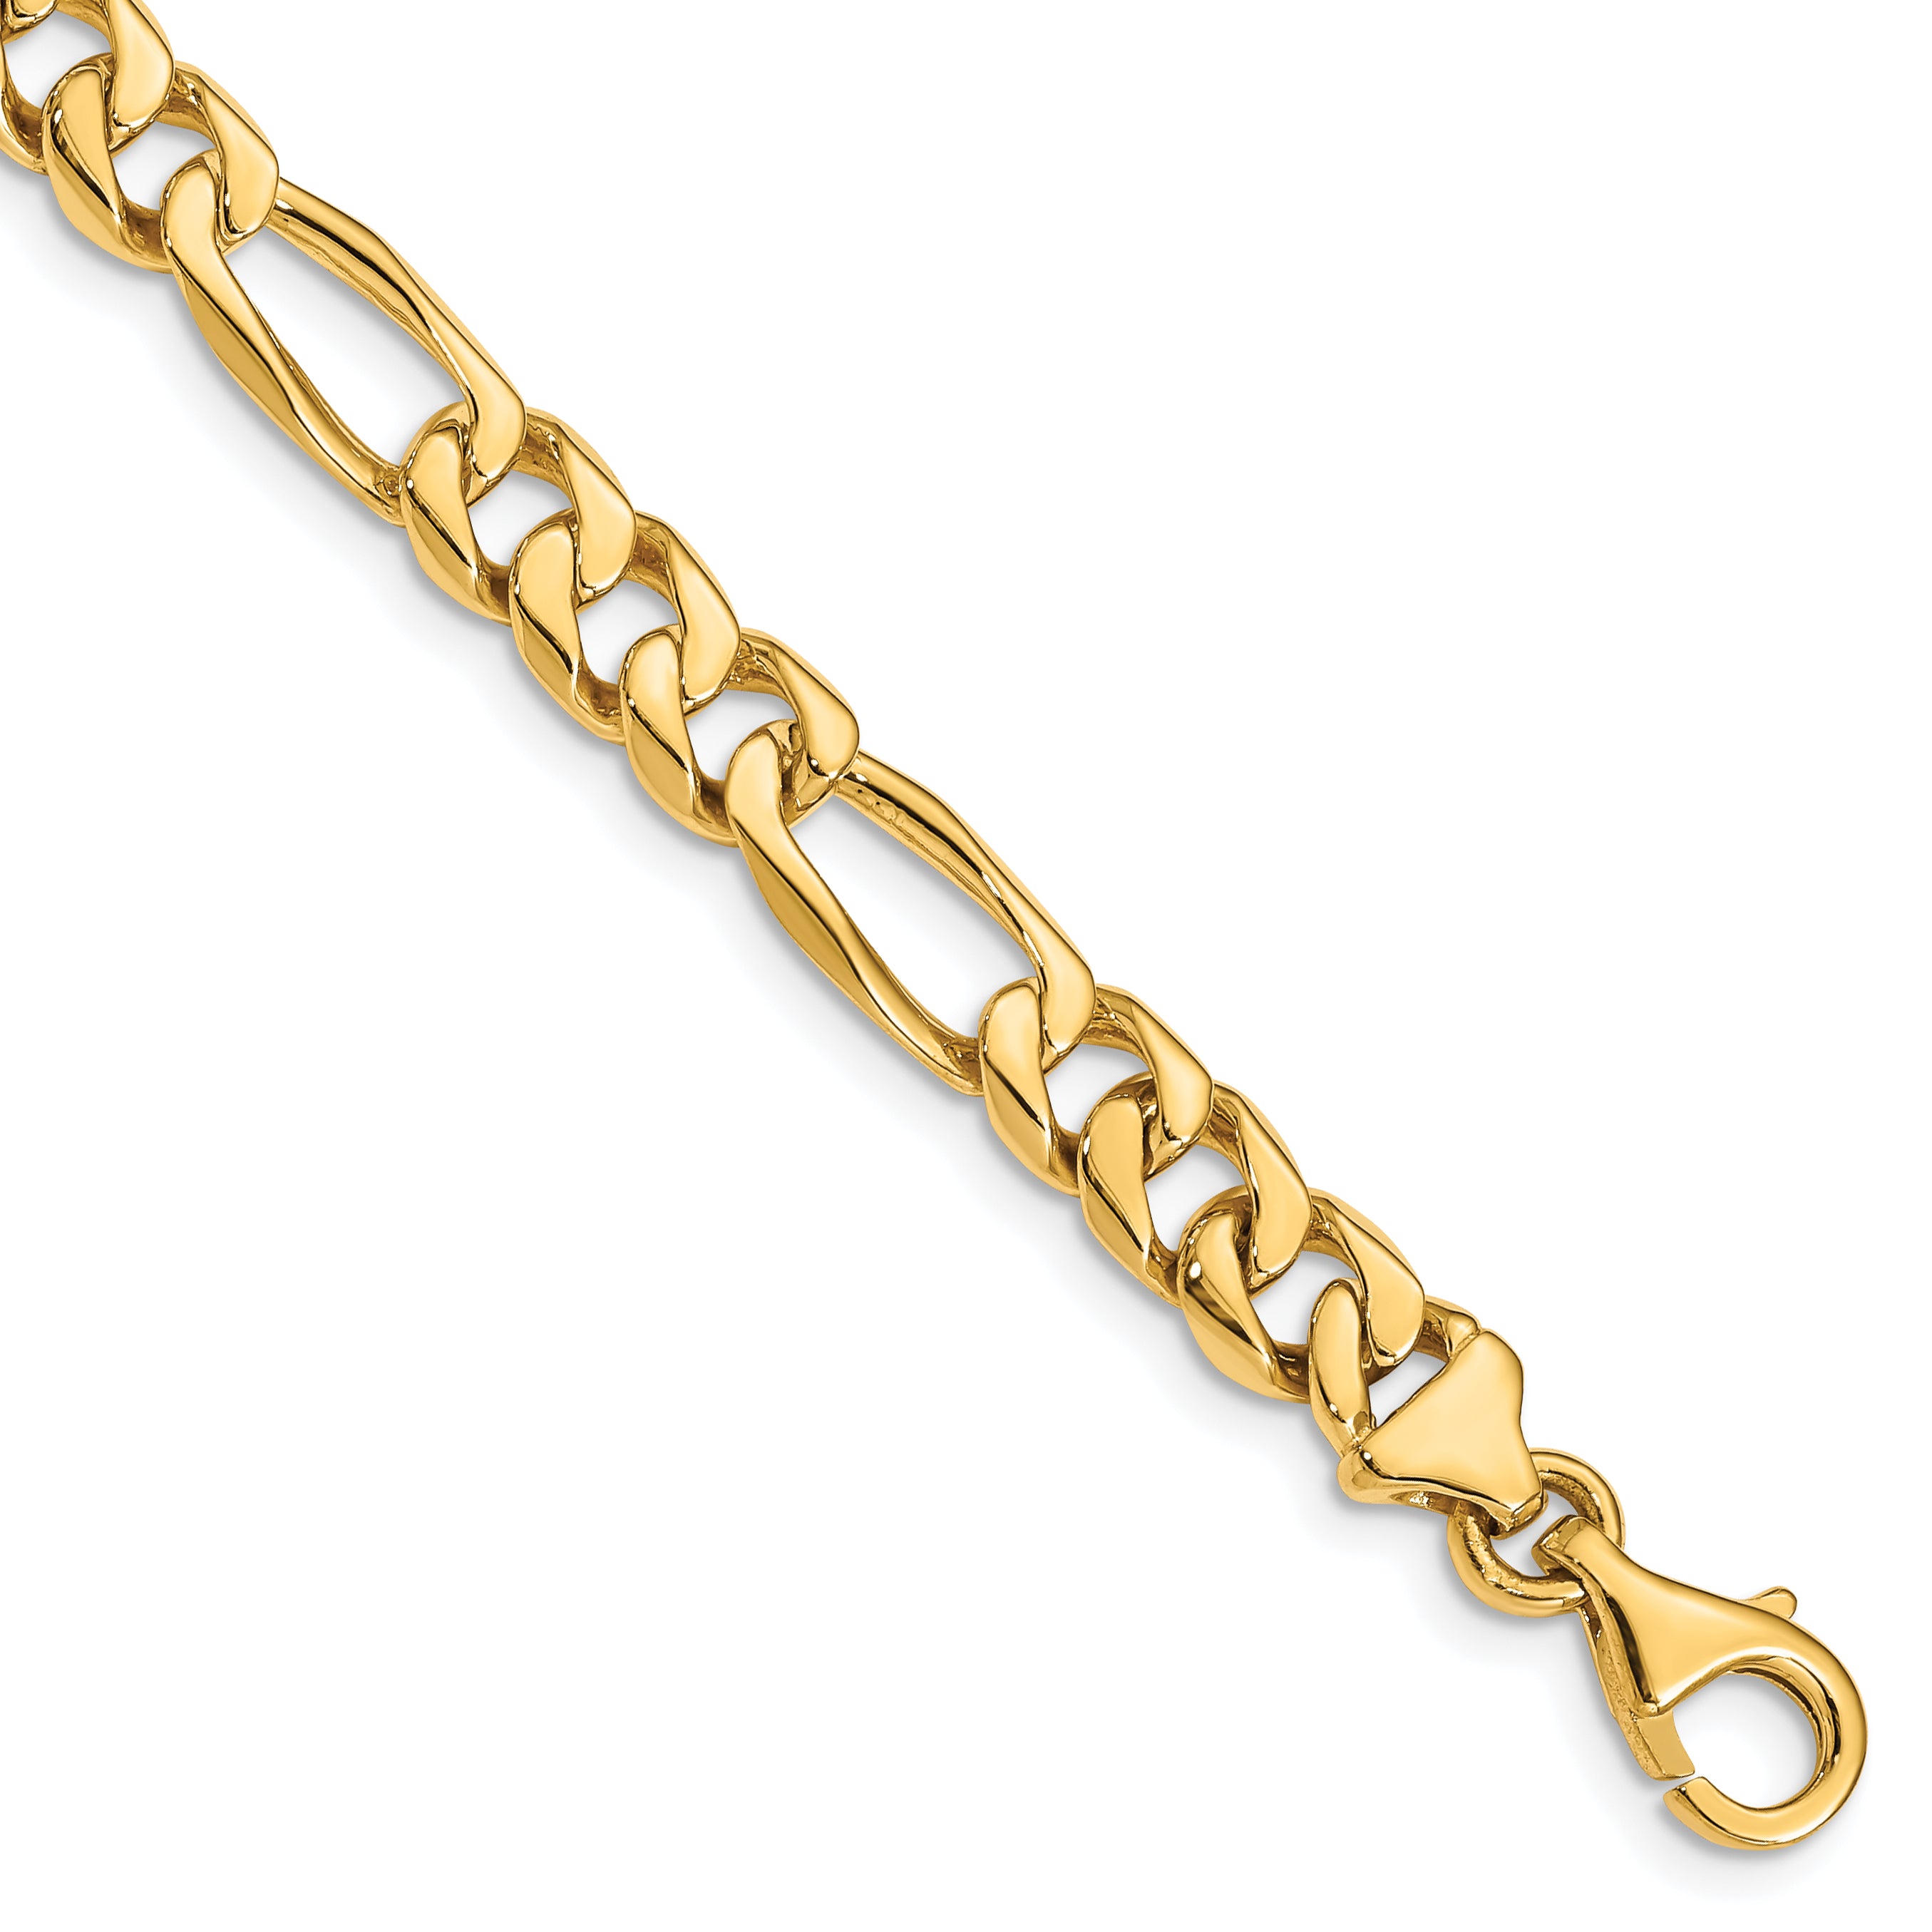 5.5mm 18k Solid Yellow Gold Chain Extender 3 inches Length